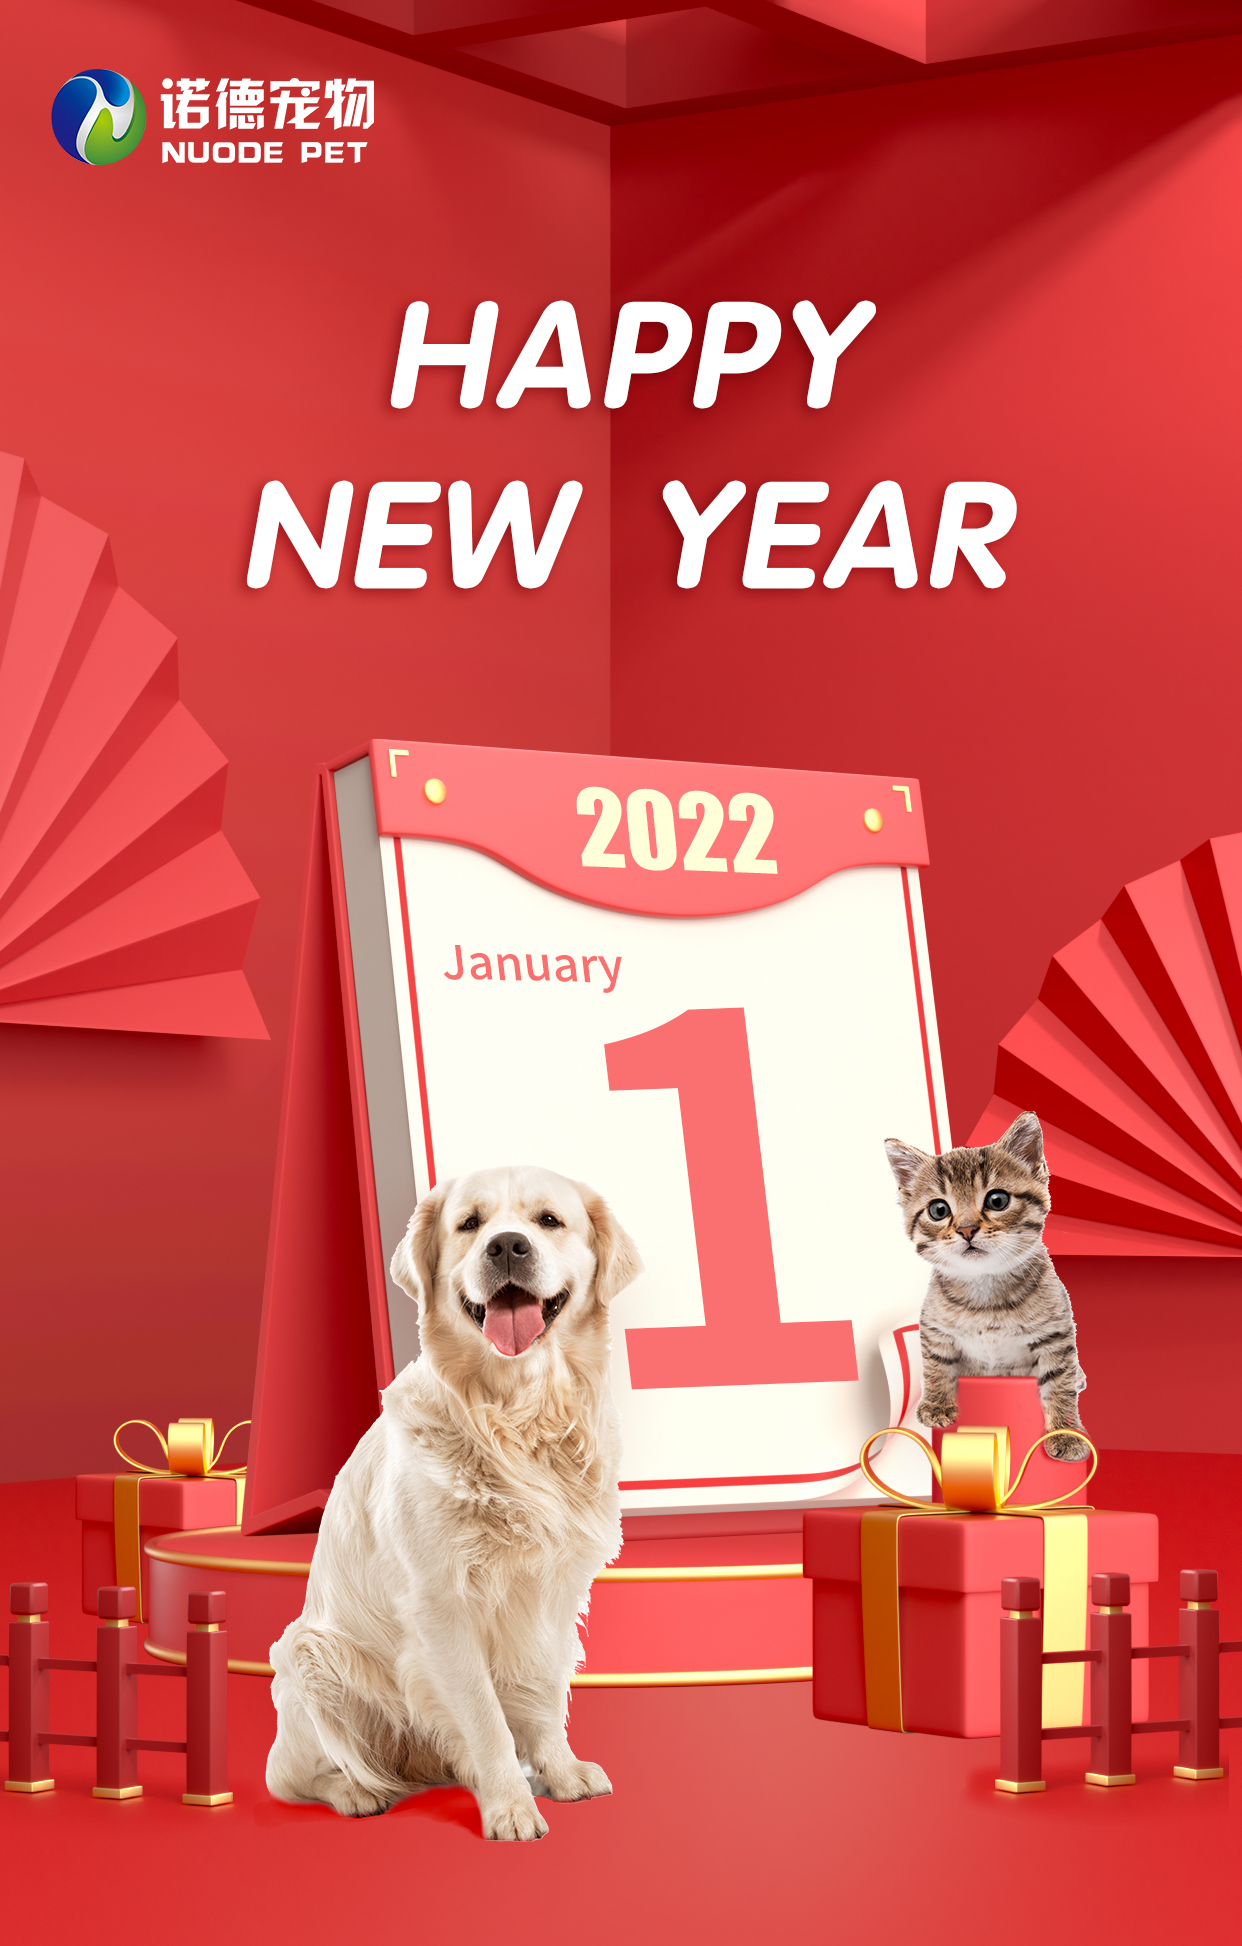 The 2022 New Year's Day holiday notice